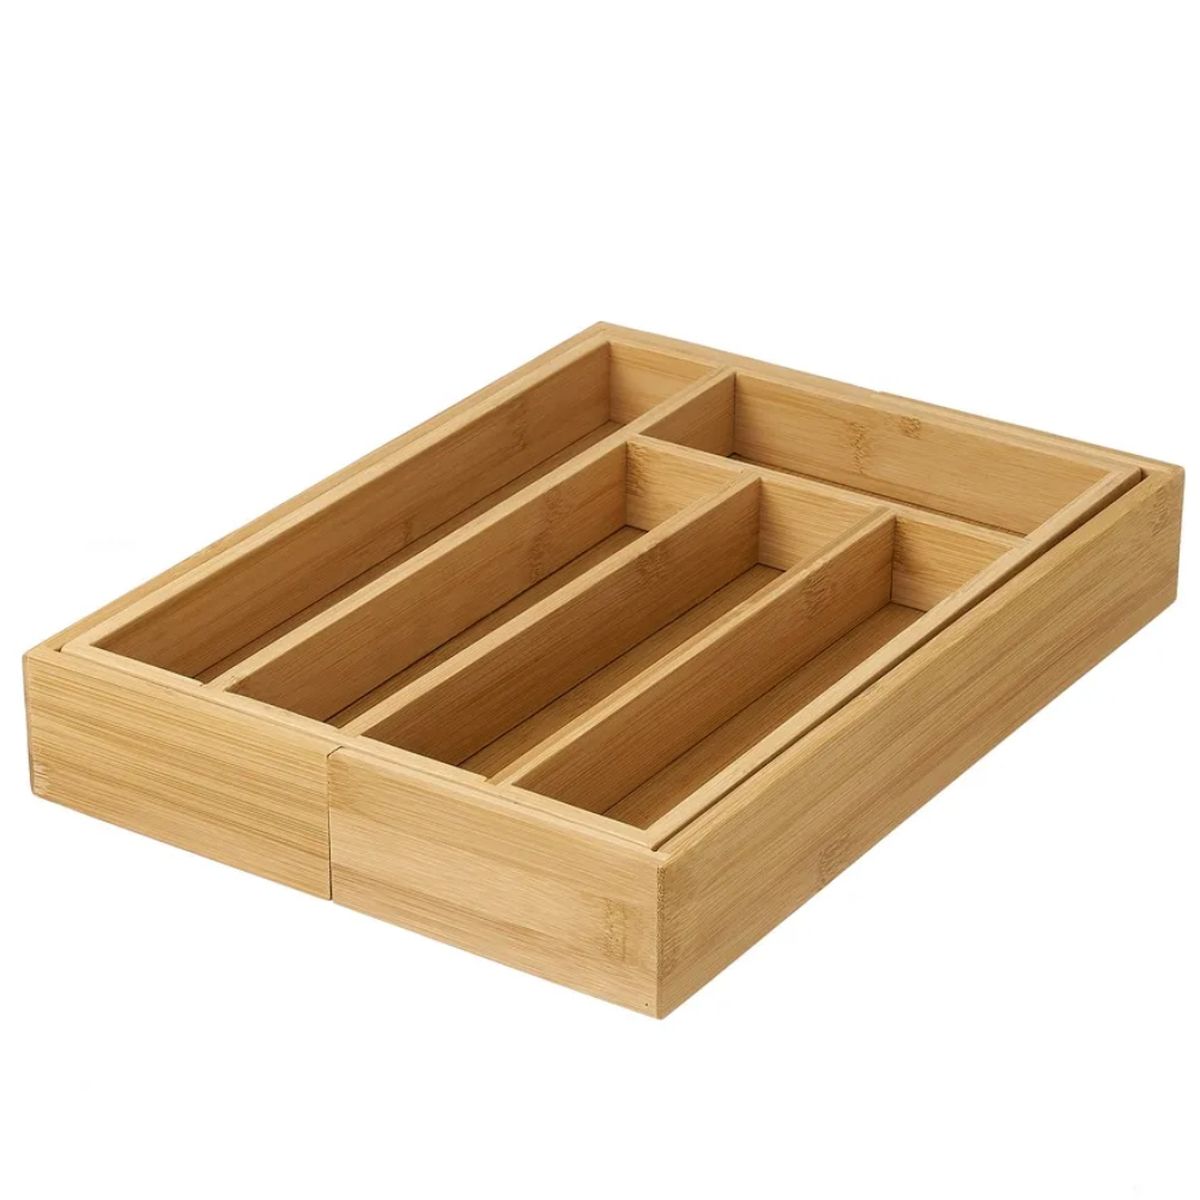 Expandable cutlery storage tray